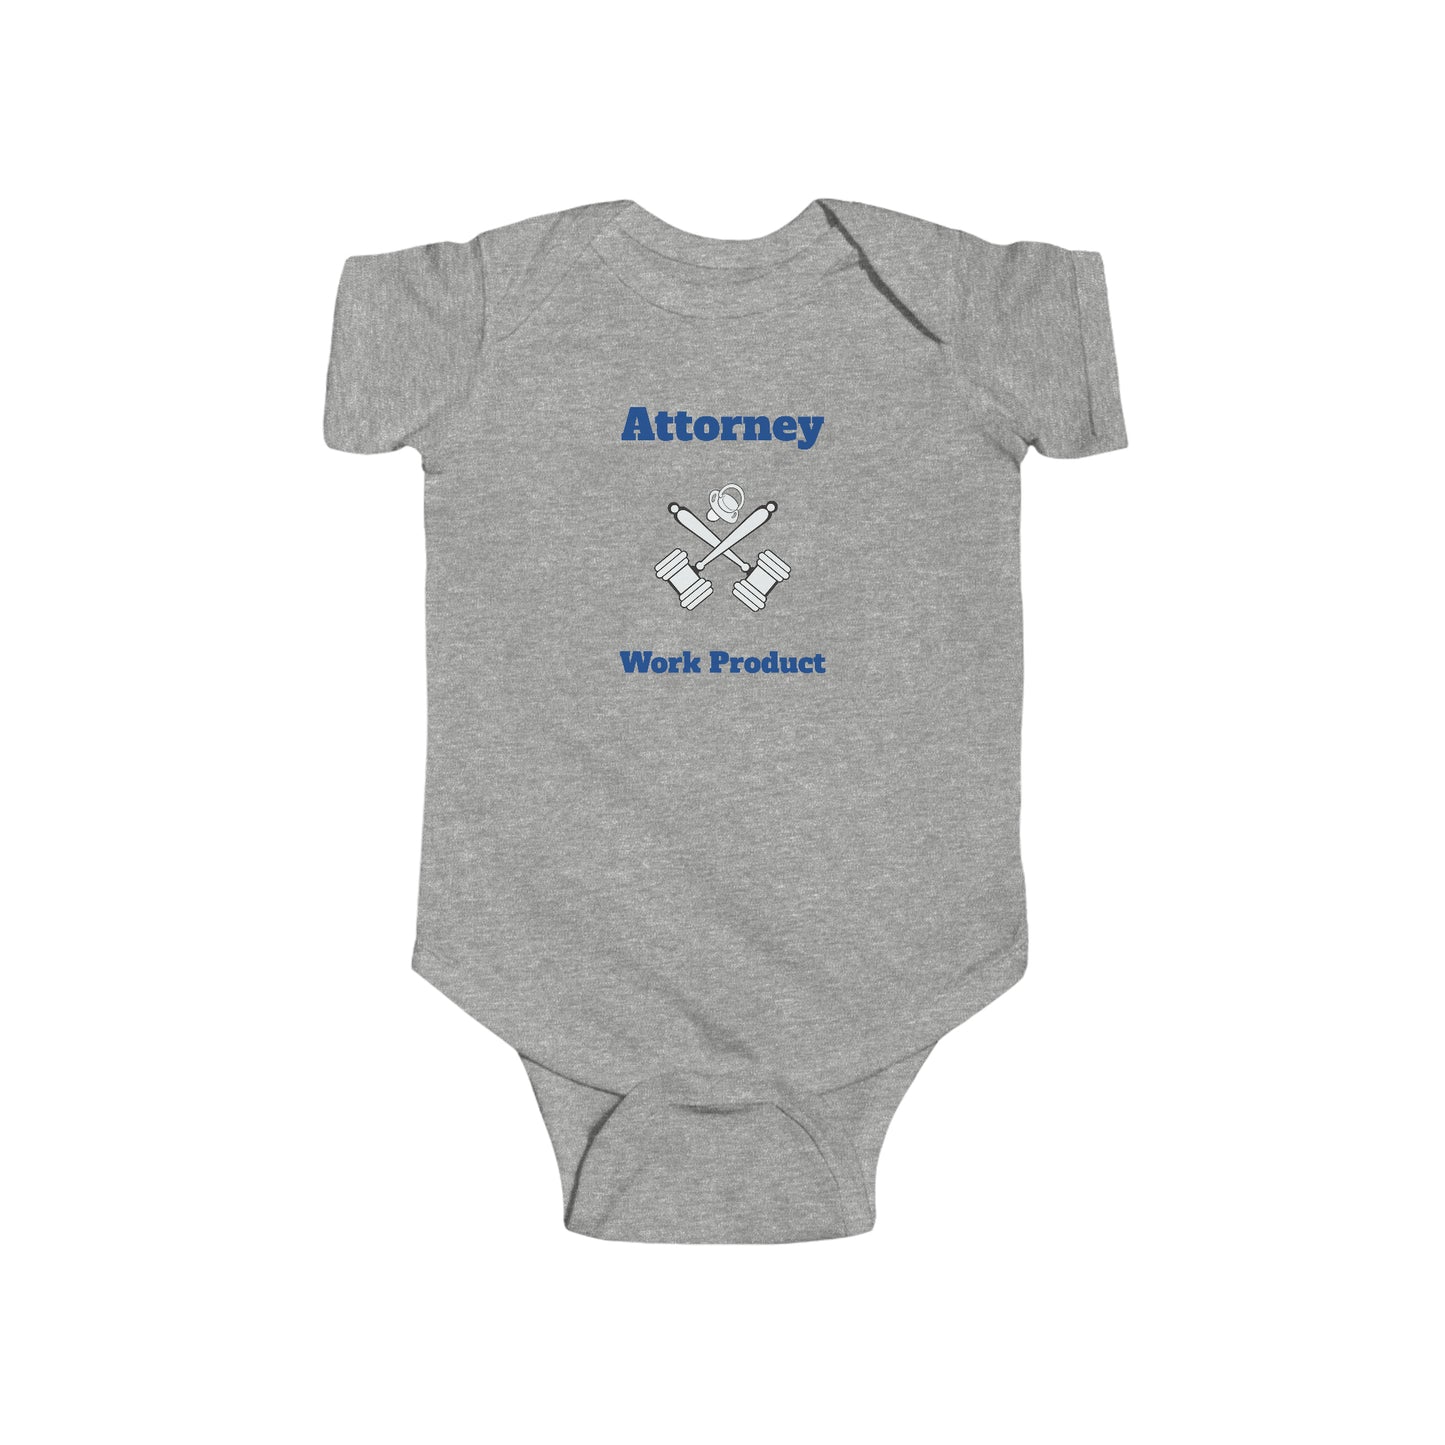 Attorney Work Product - Baby